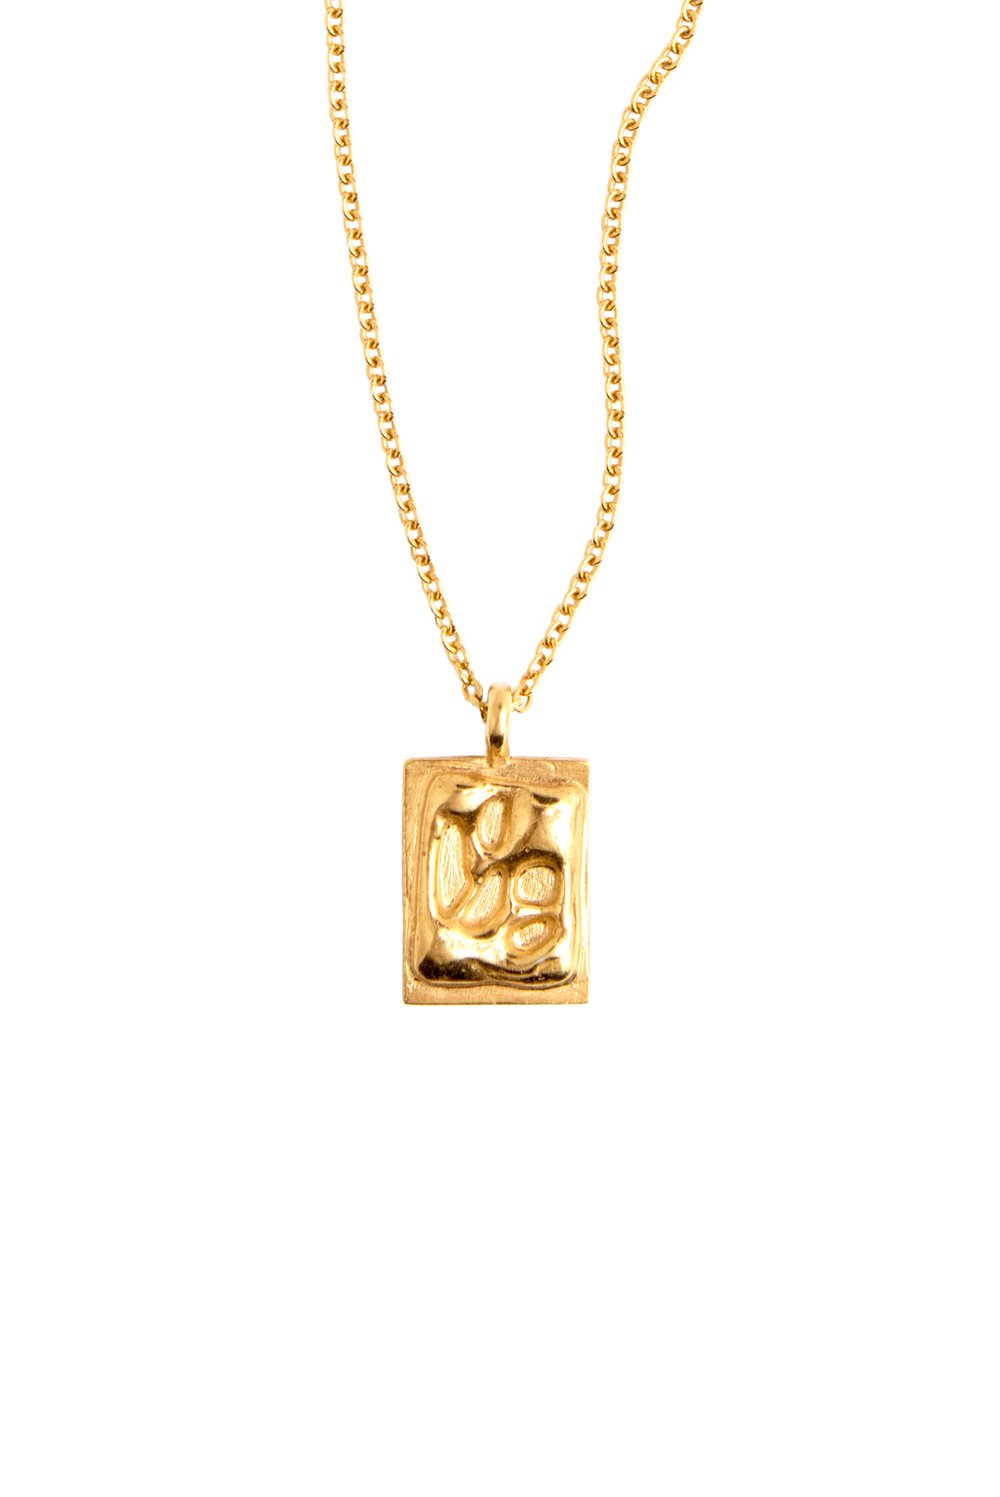 Image of Style 01 - Gold Plated